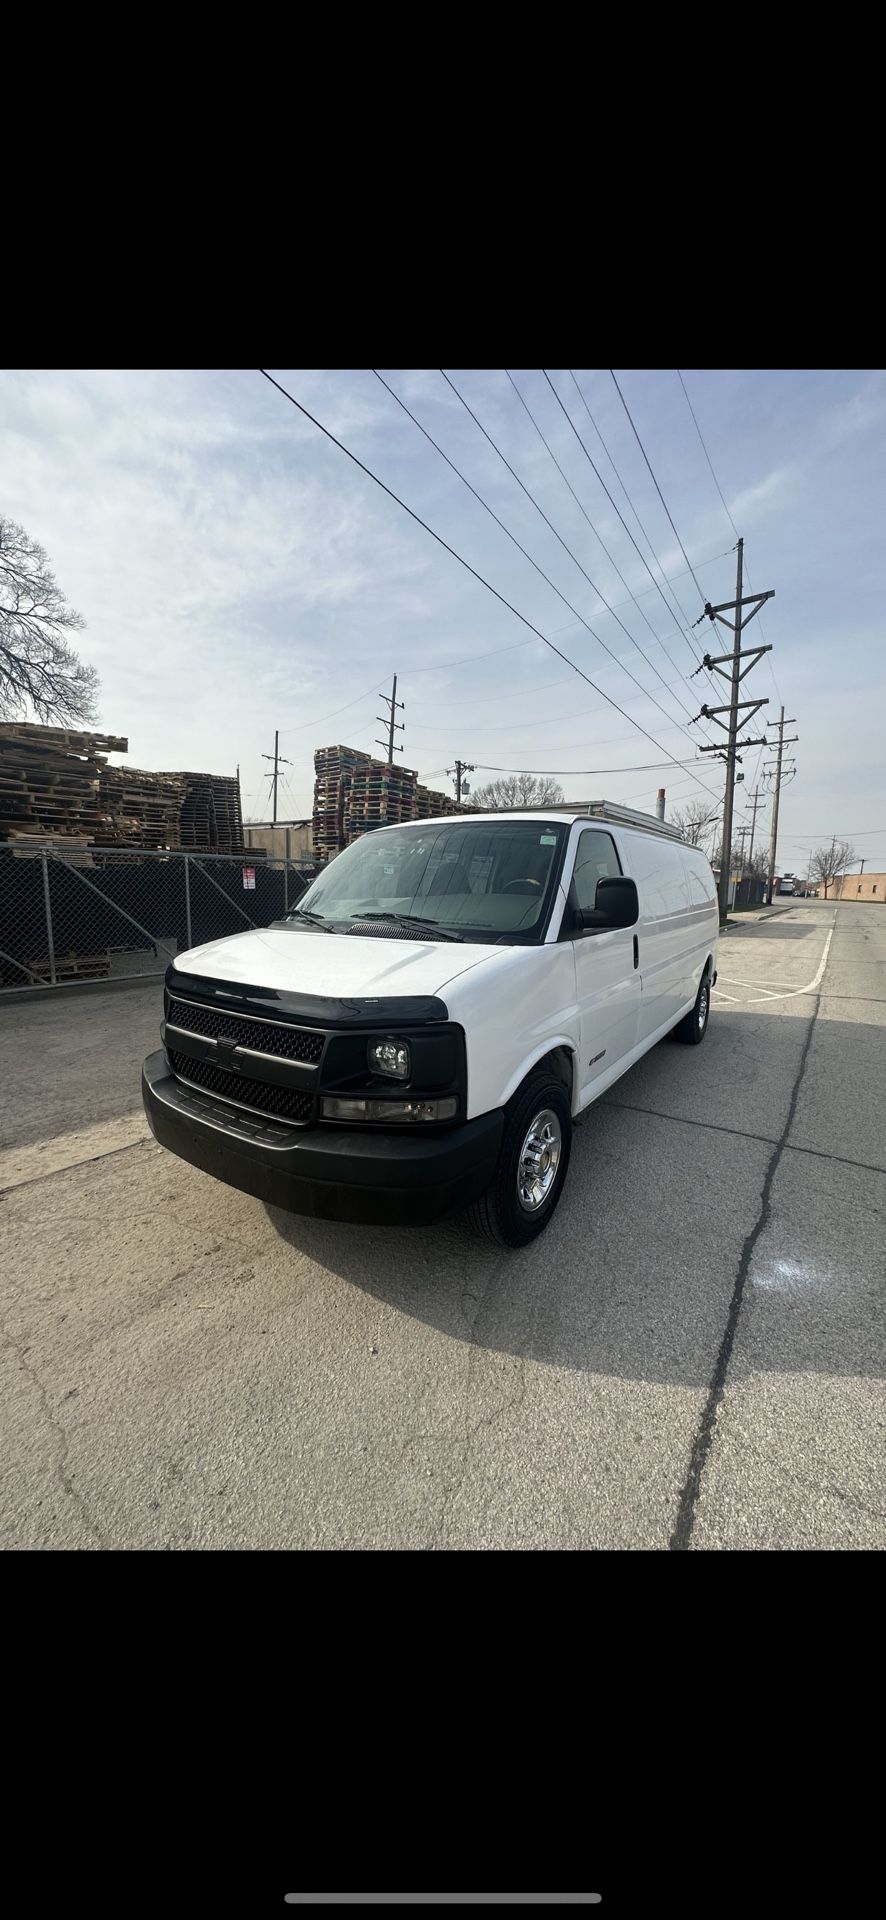 2005 Chevy Express 2500 Extended